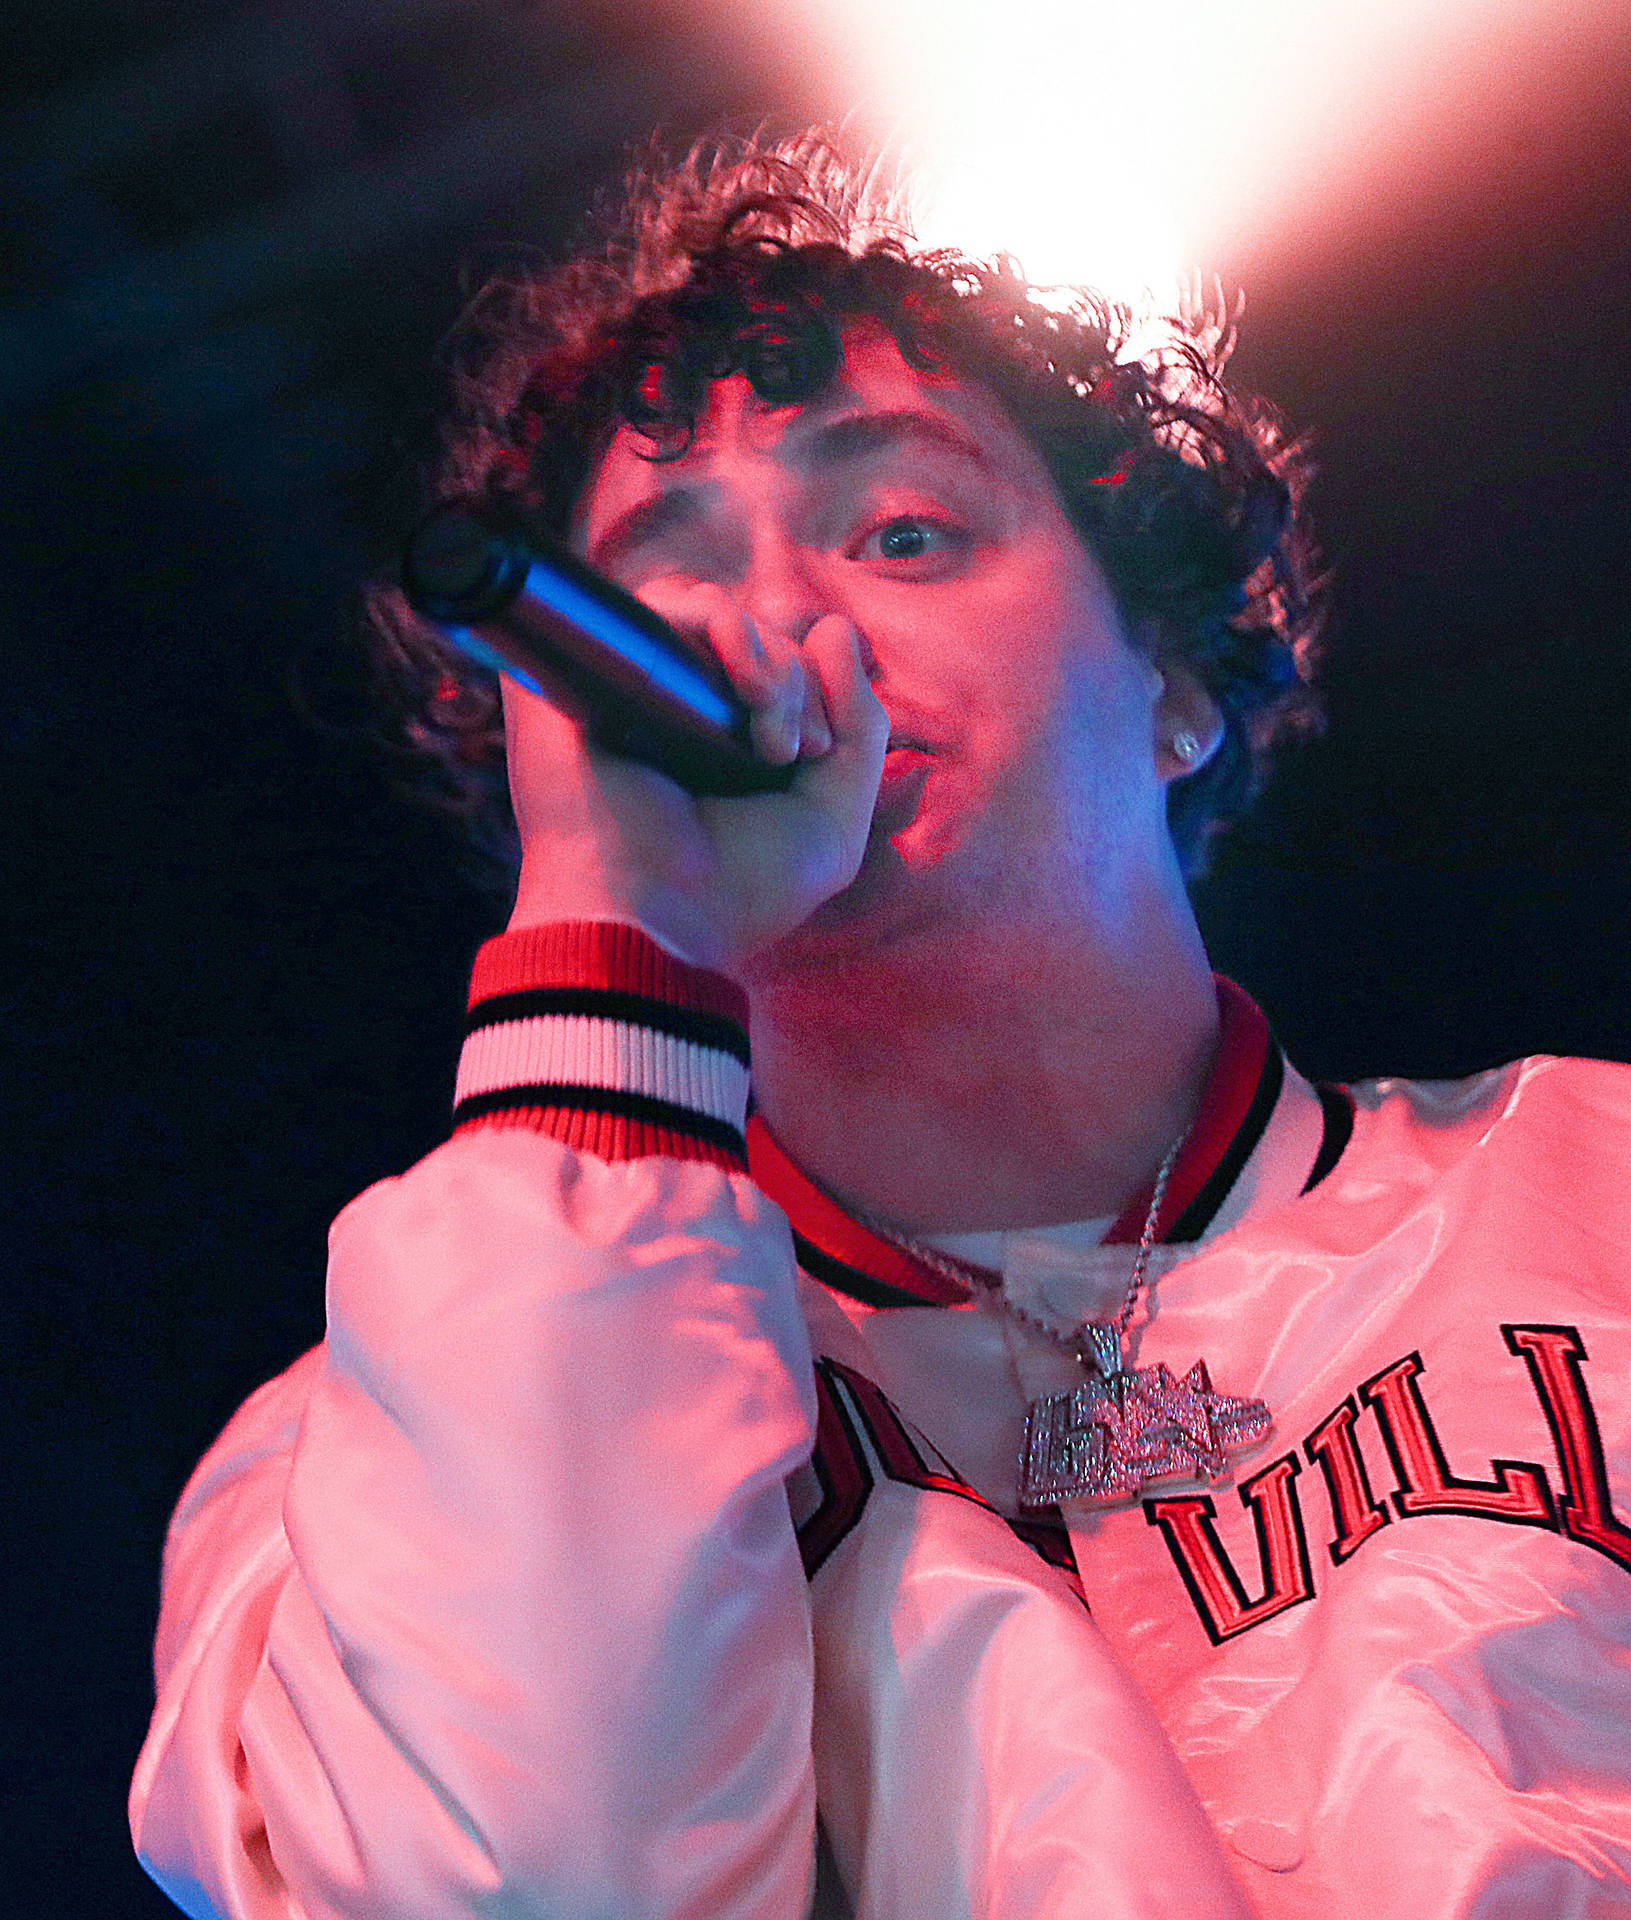 Jack Harlow Holding Microphone Background